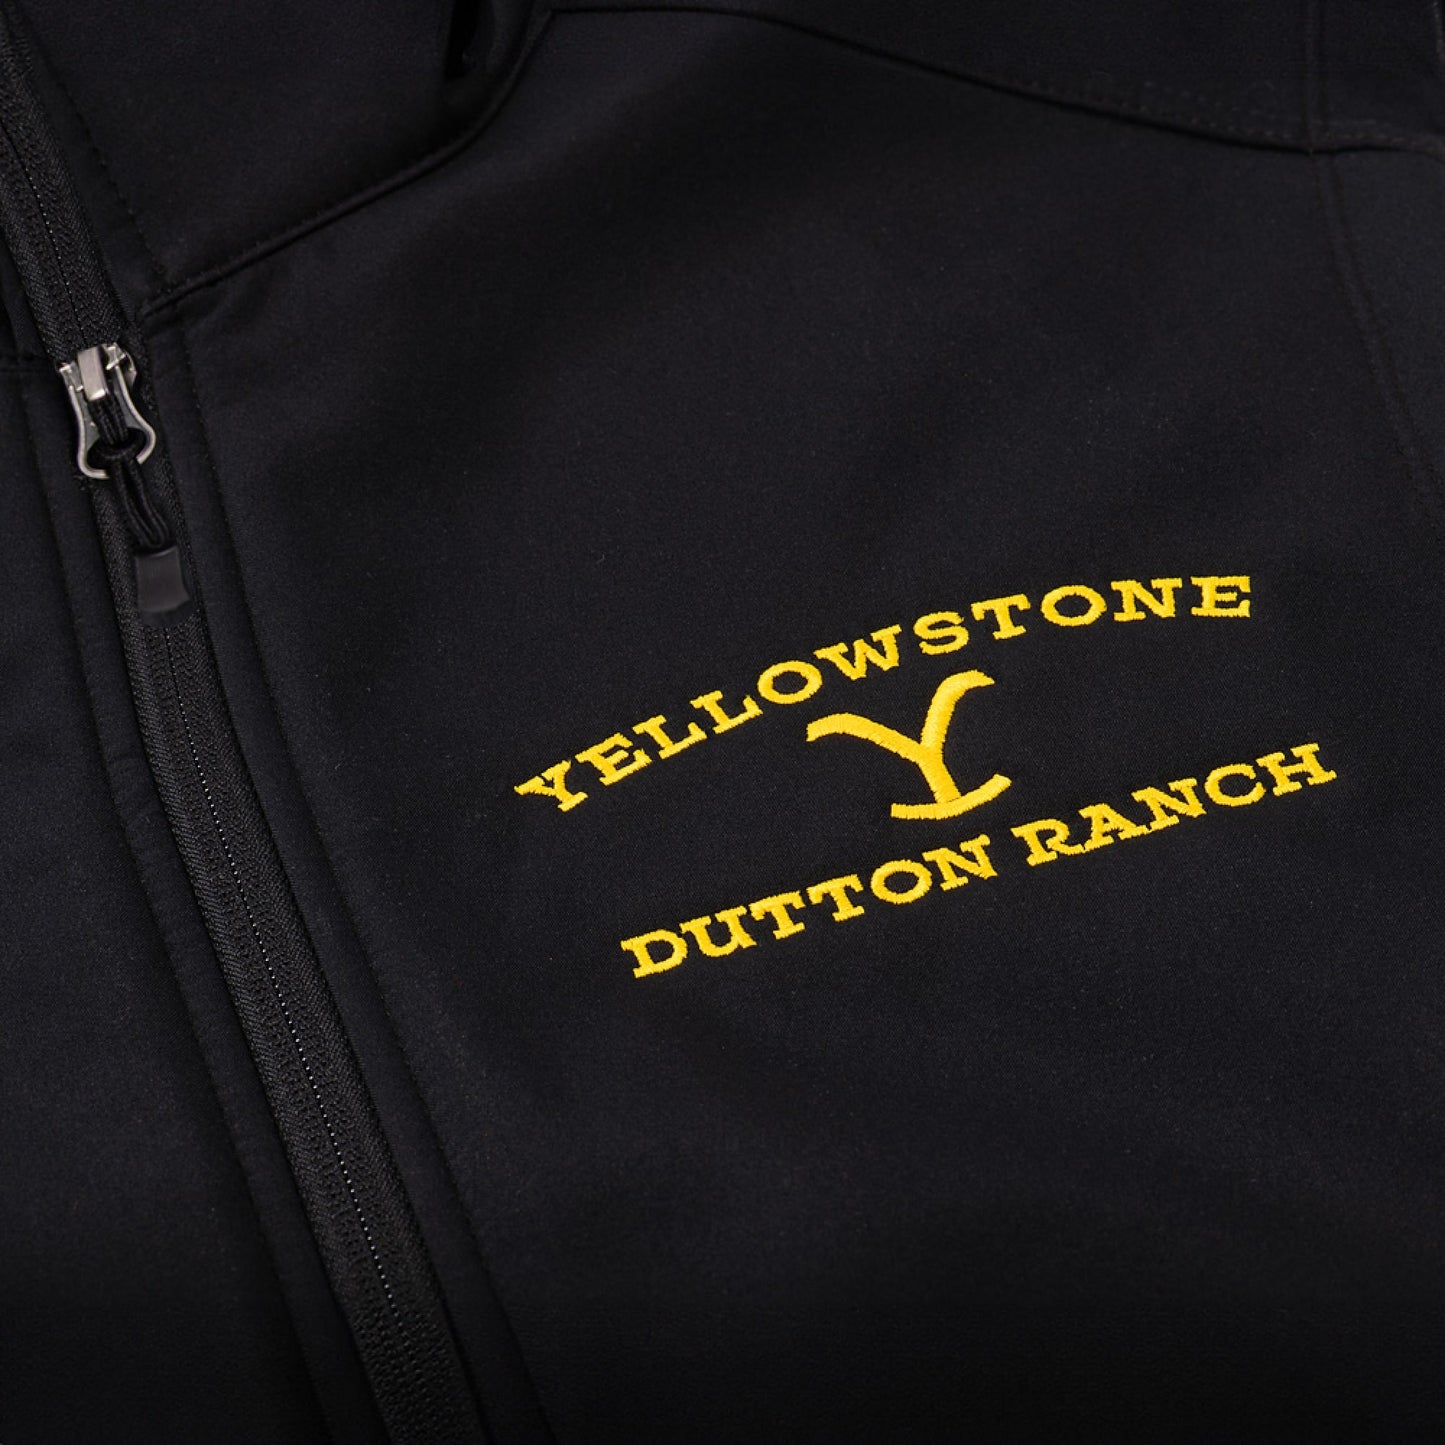 As Seen On Yellowstone Dutton Ranch Logo Core Soft Shell Vest - Paramount Shop